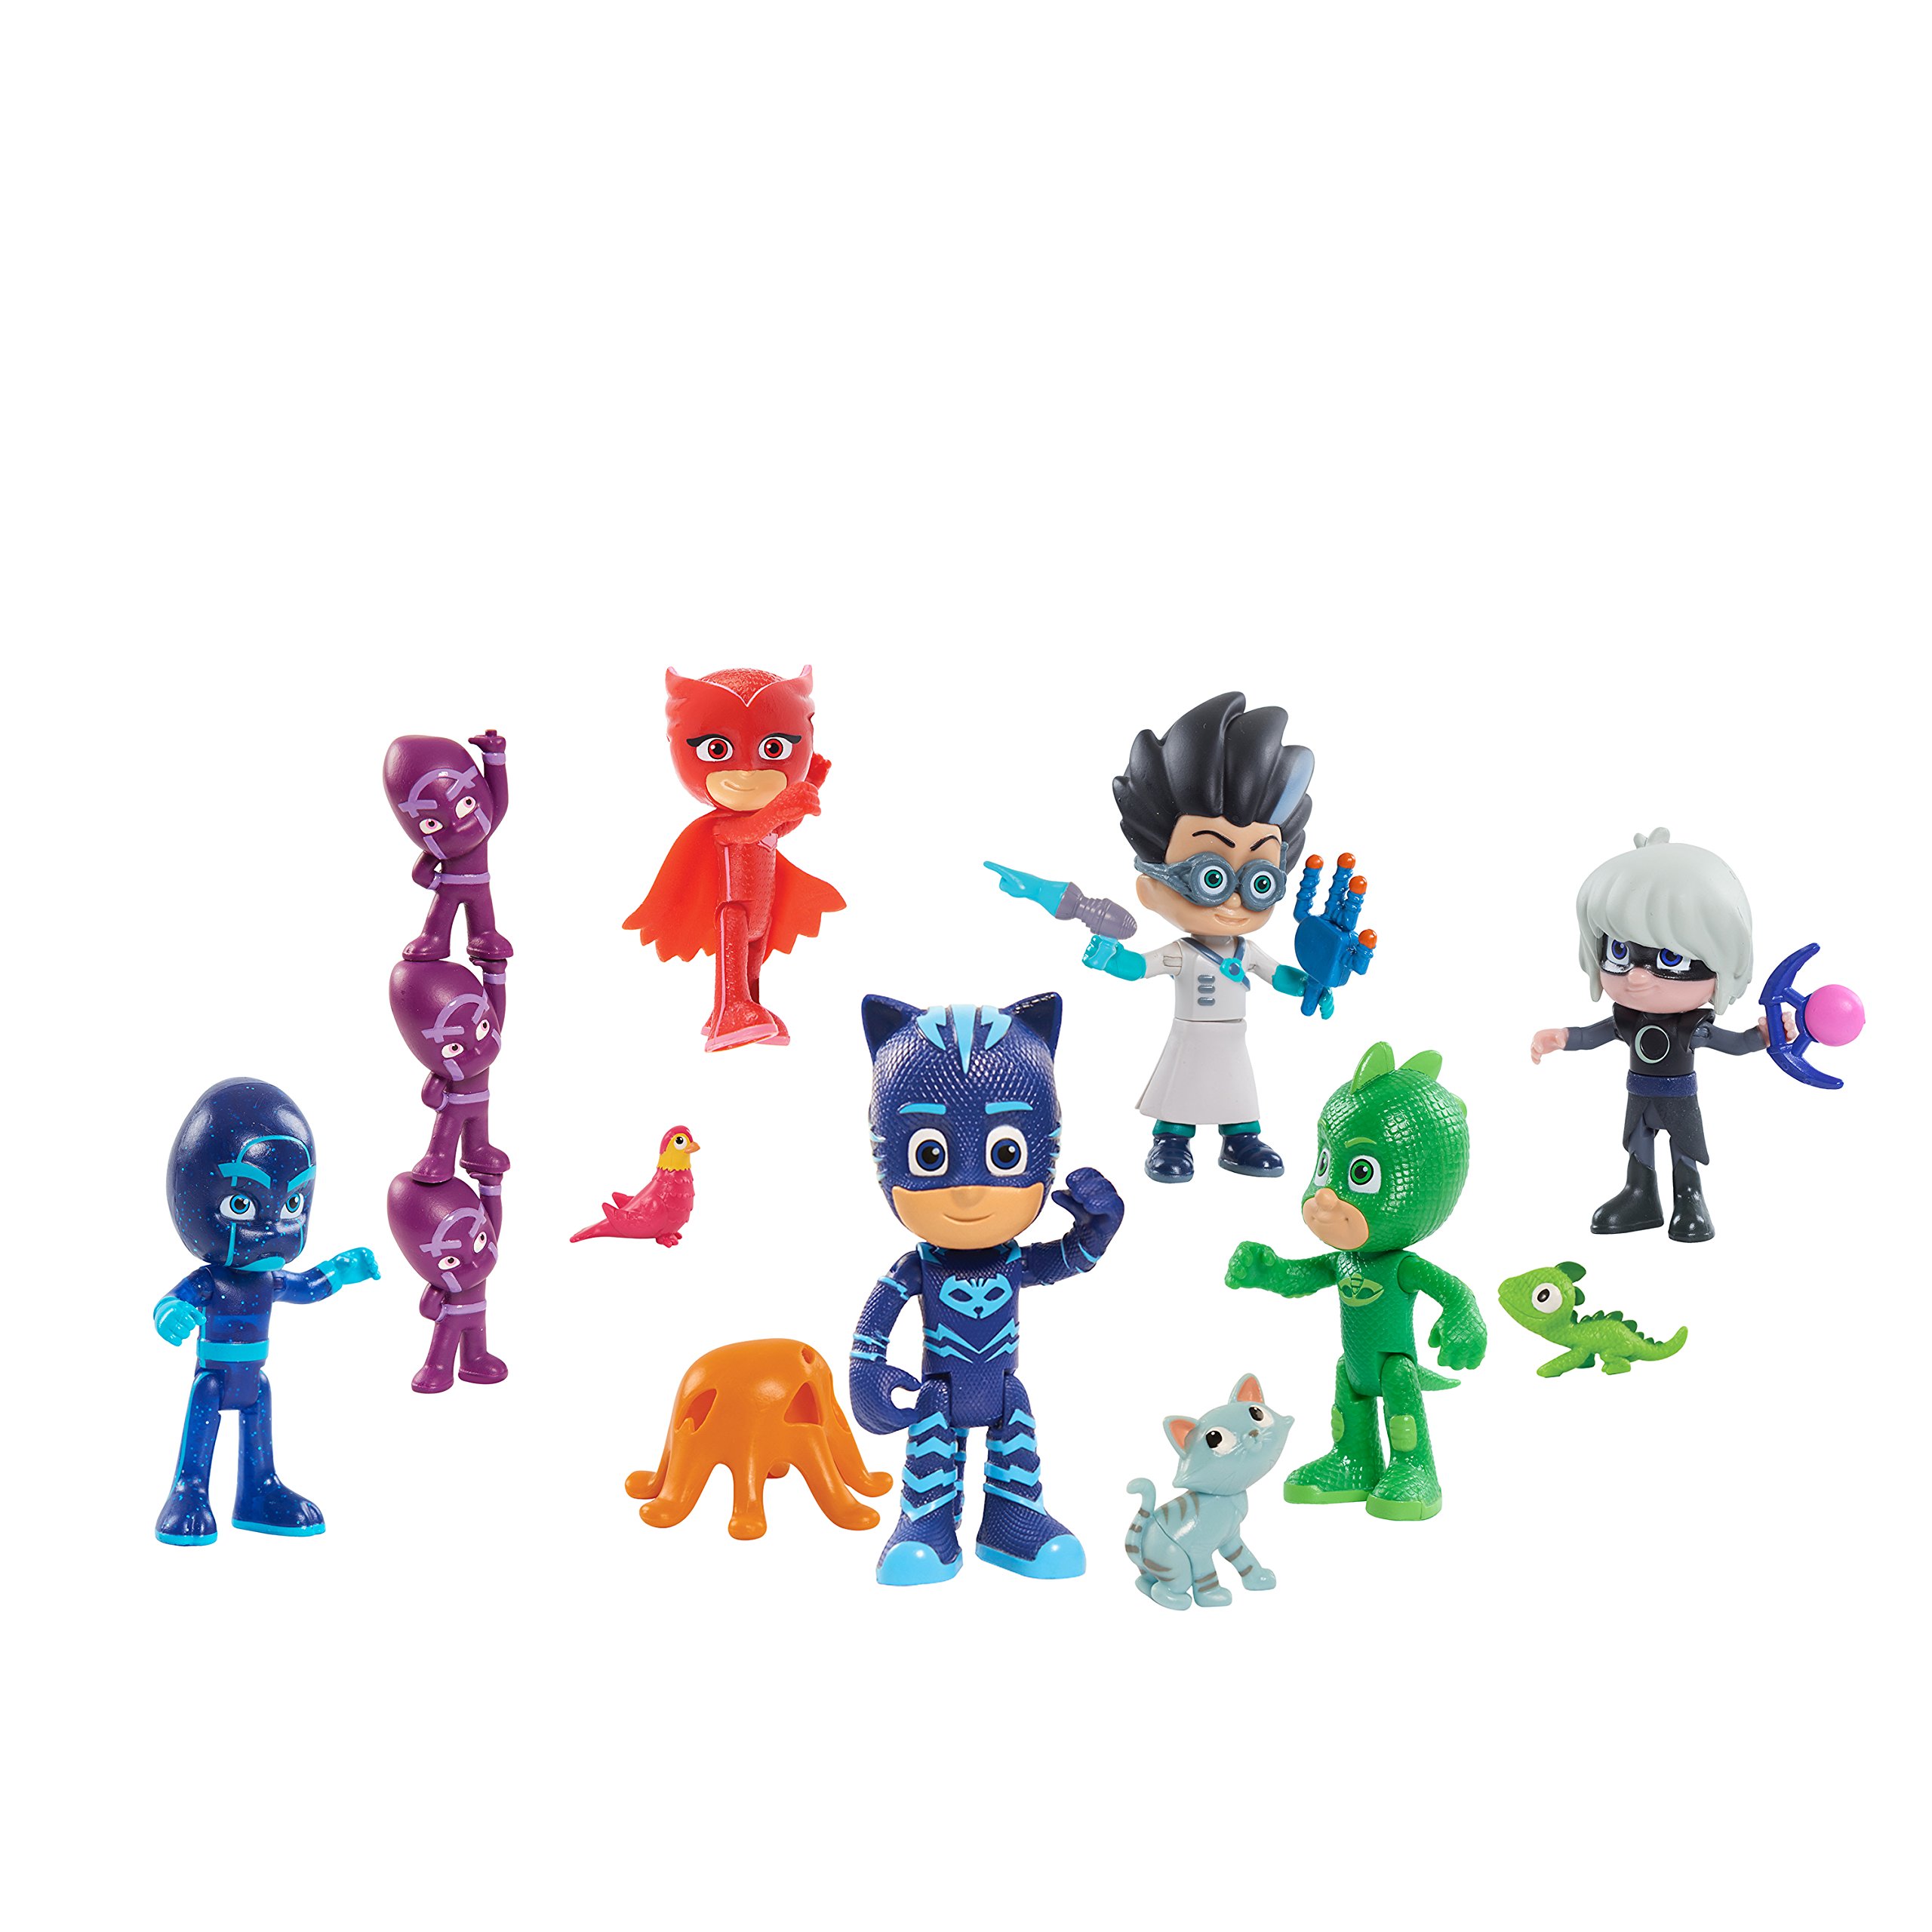 PJ Masks Deluxe 16-Piece Figure Set - Branded Mailer, by Just Play